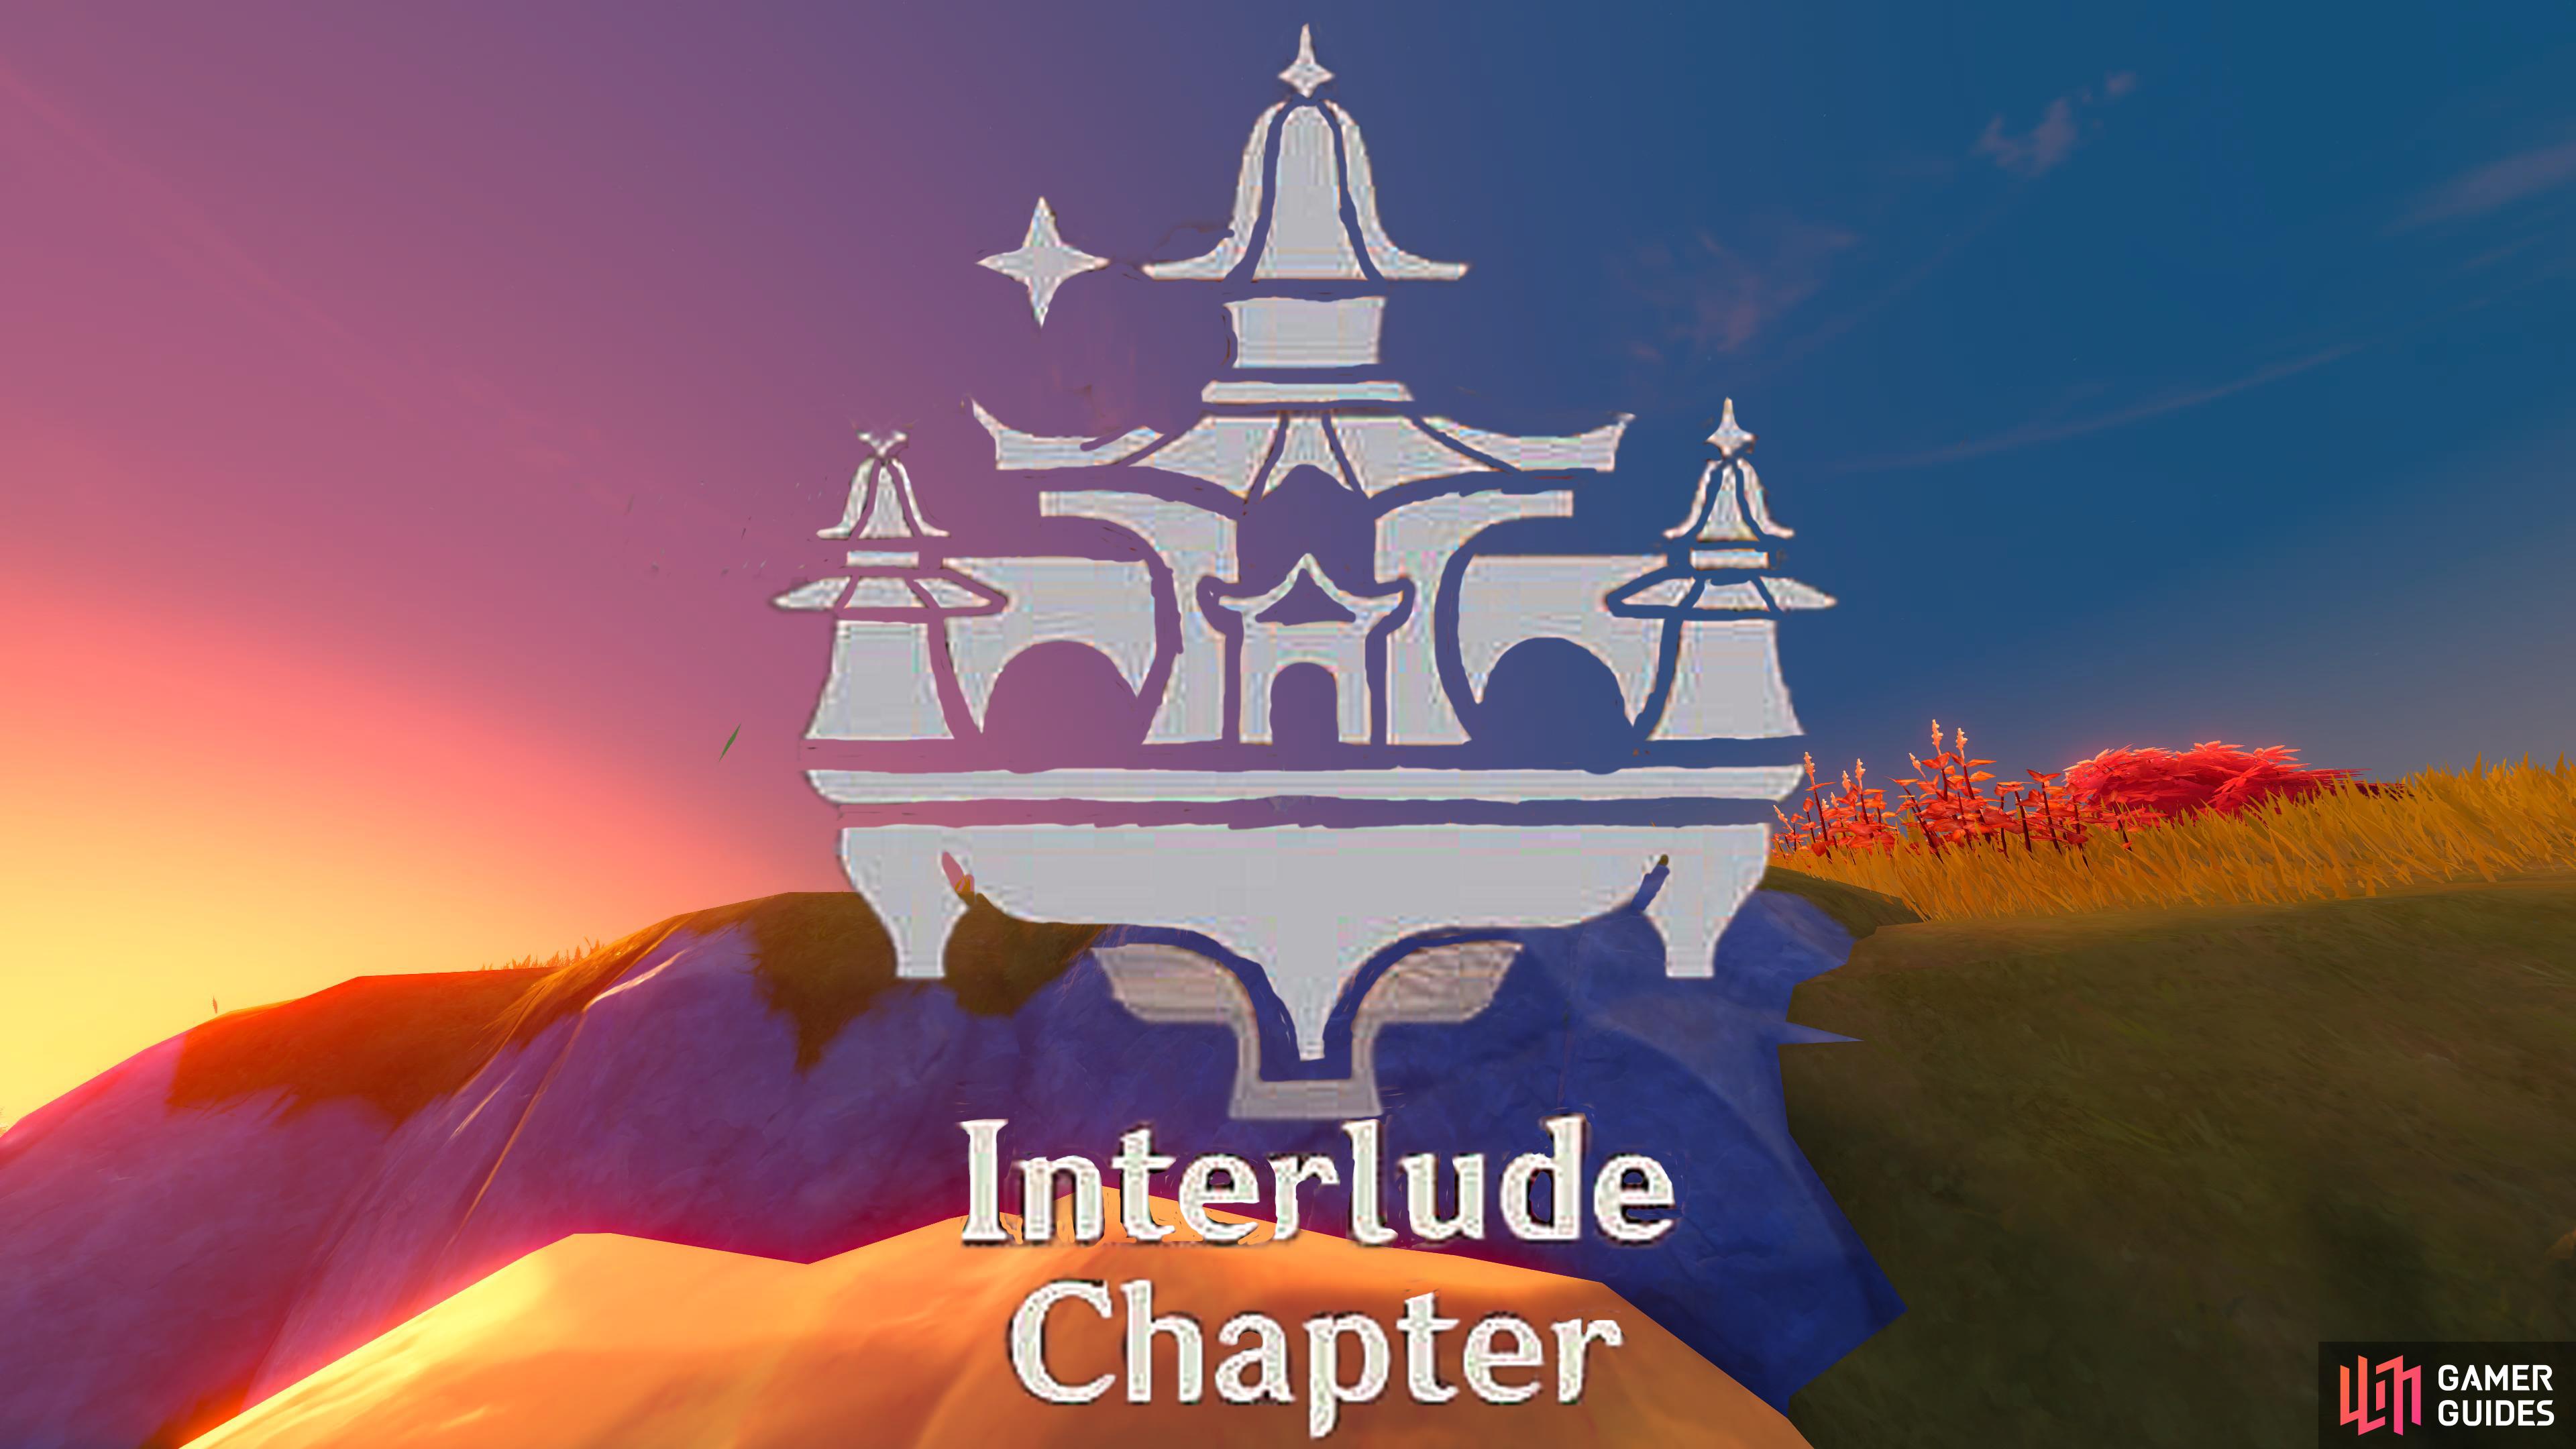 Interlude Chapters are normally the quests in-between the main chapters.